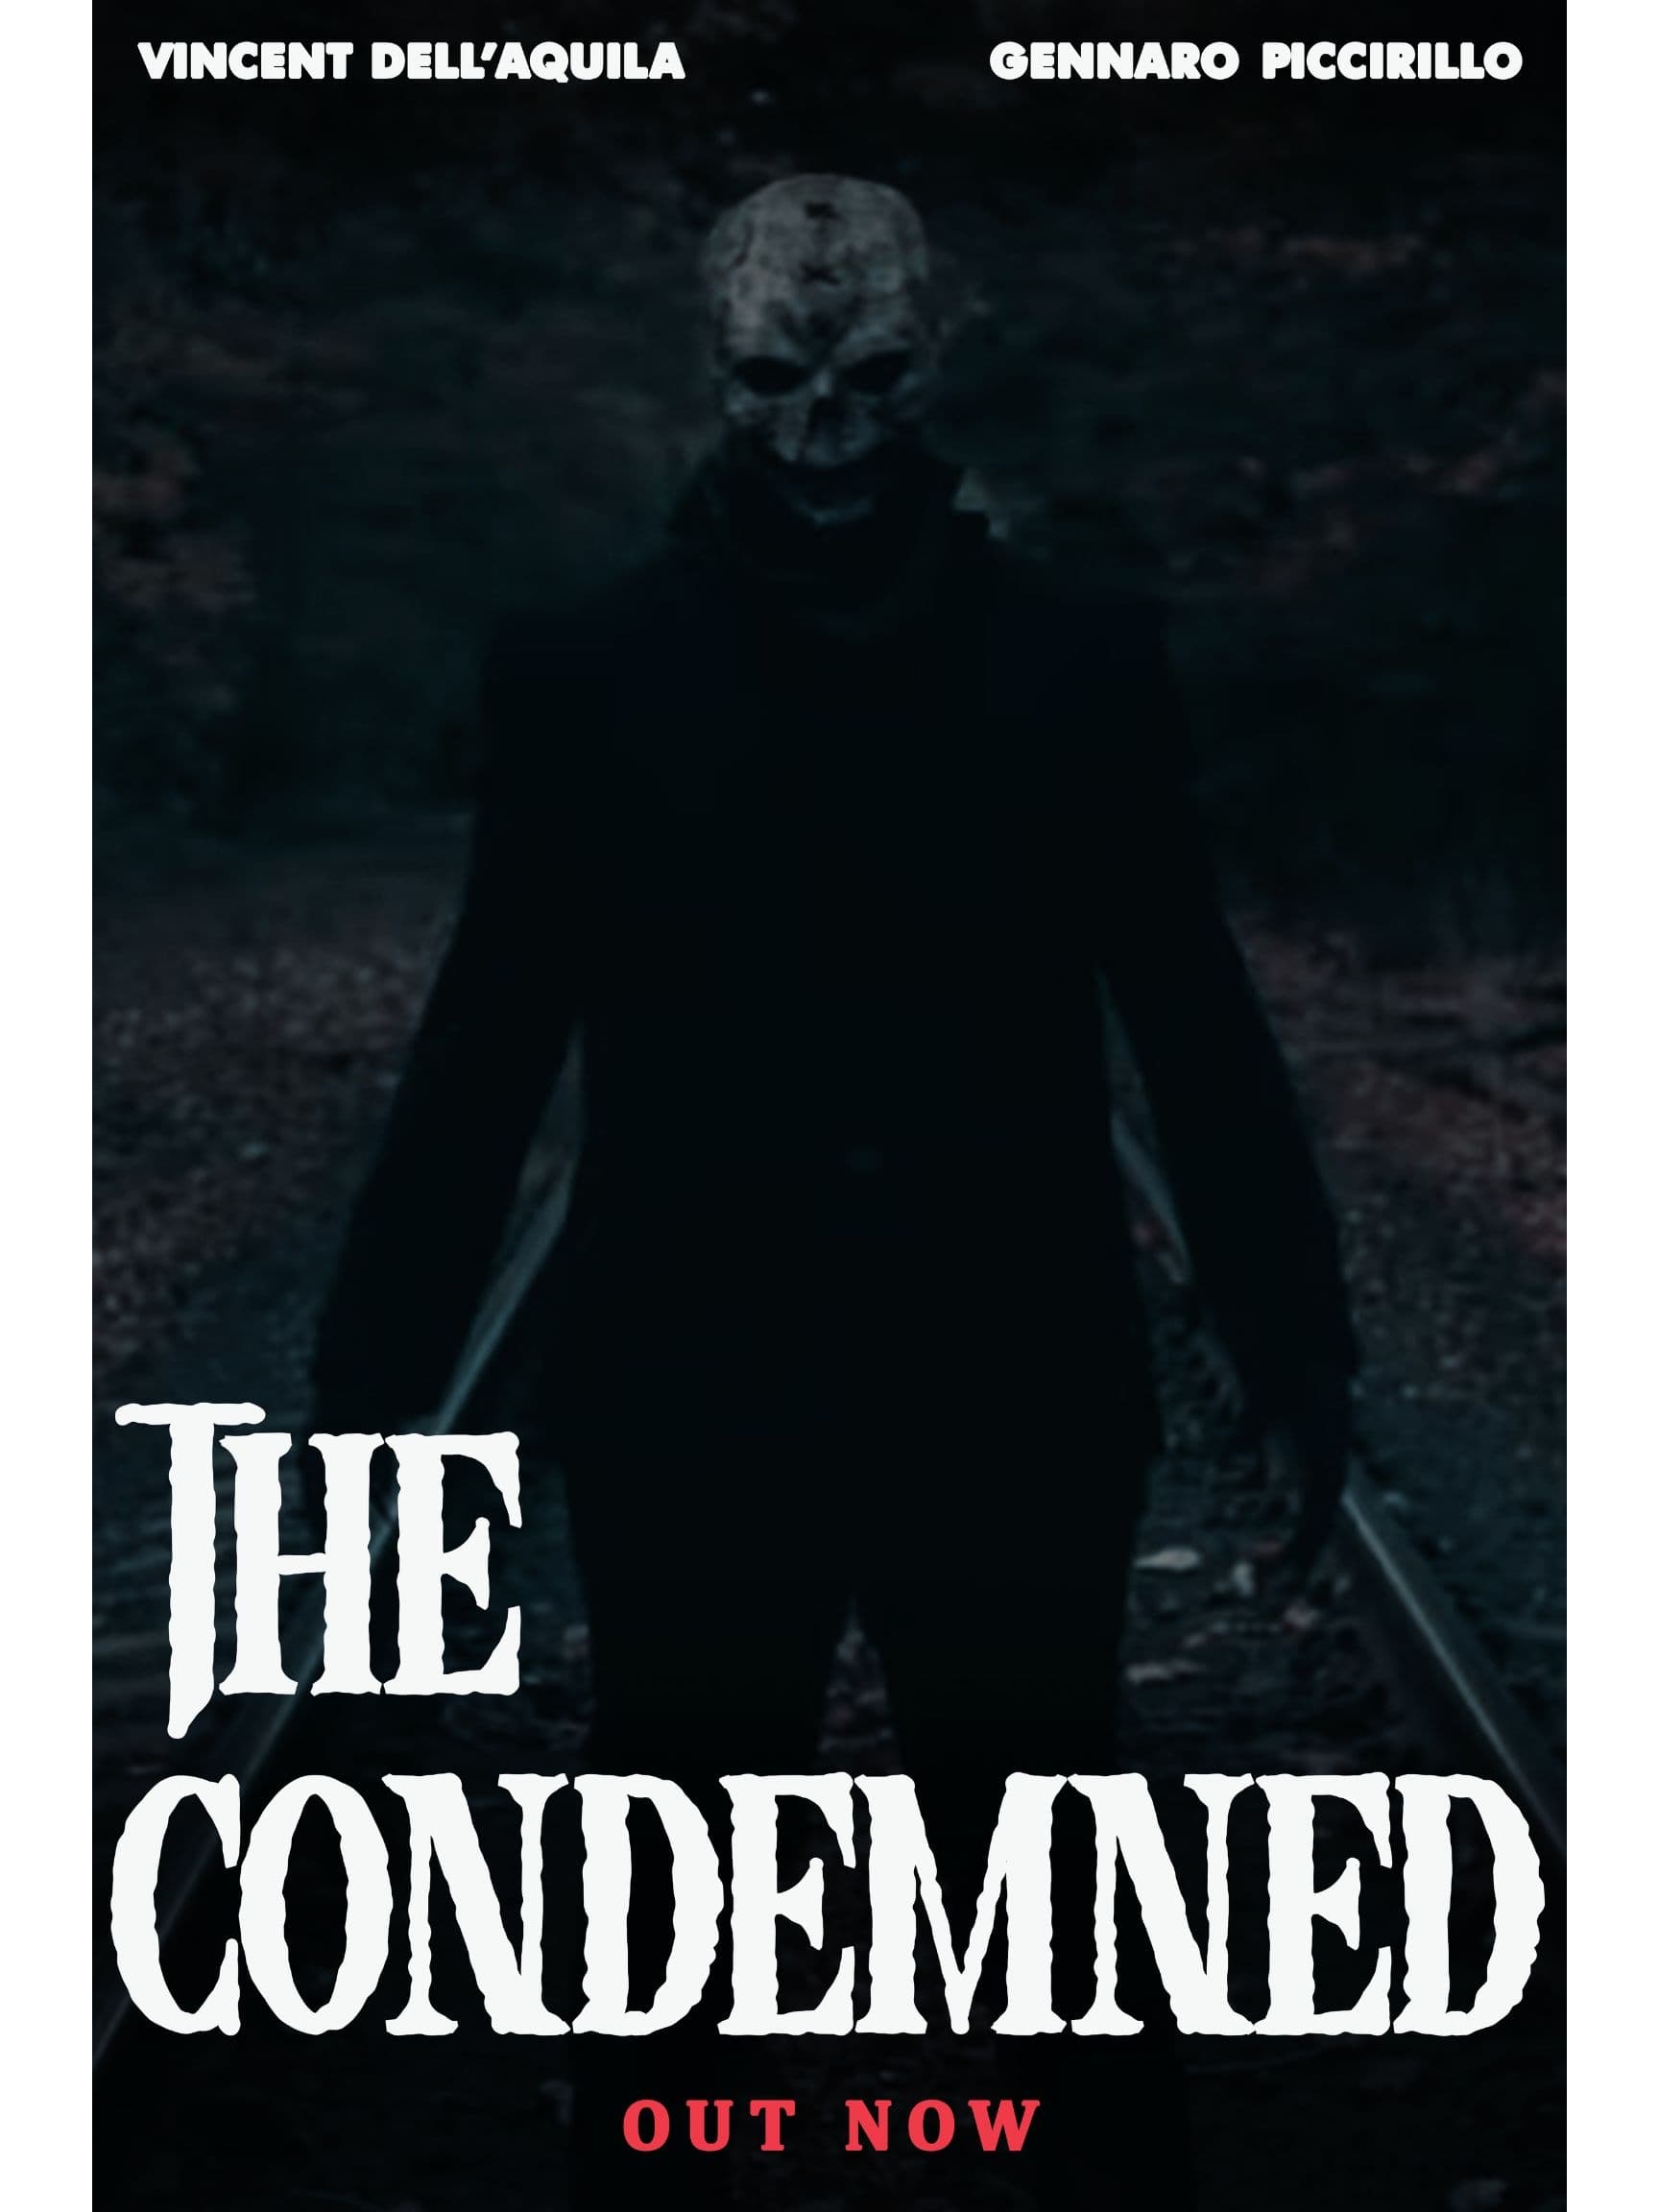 The CONDEMNED